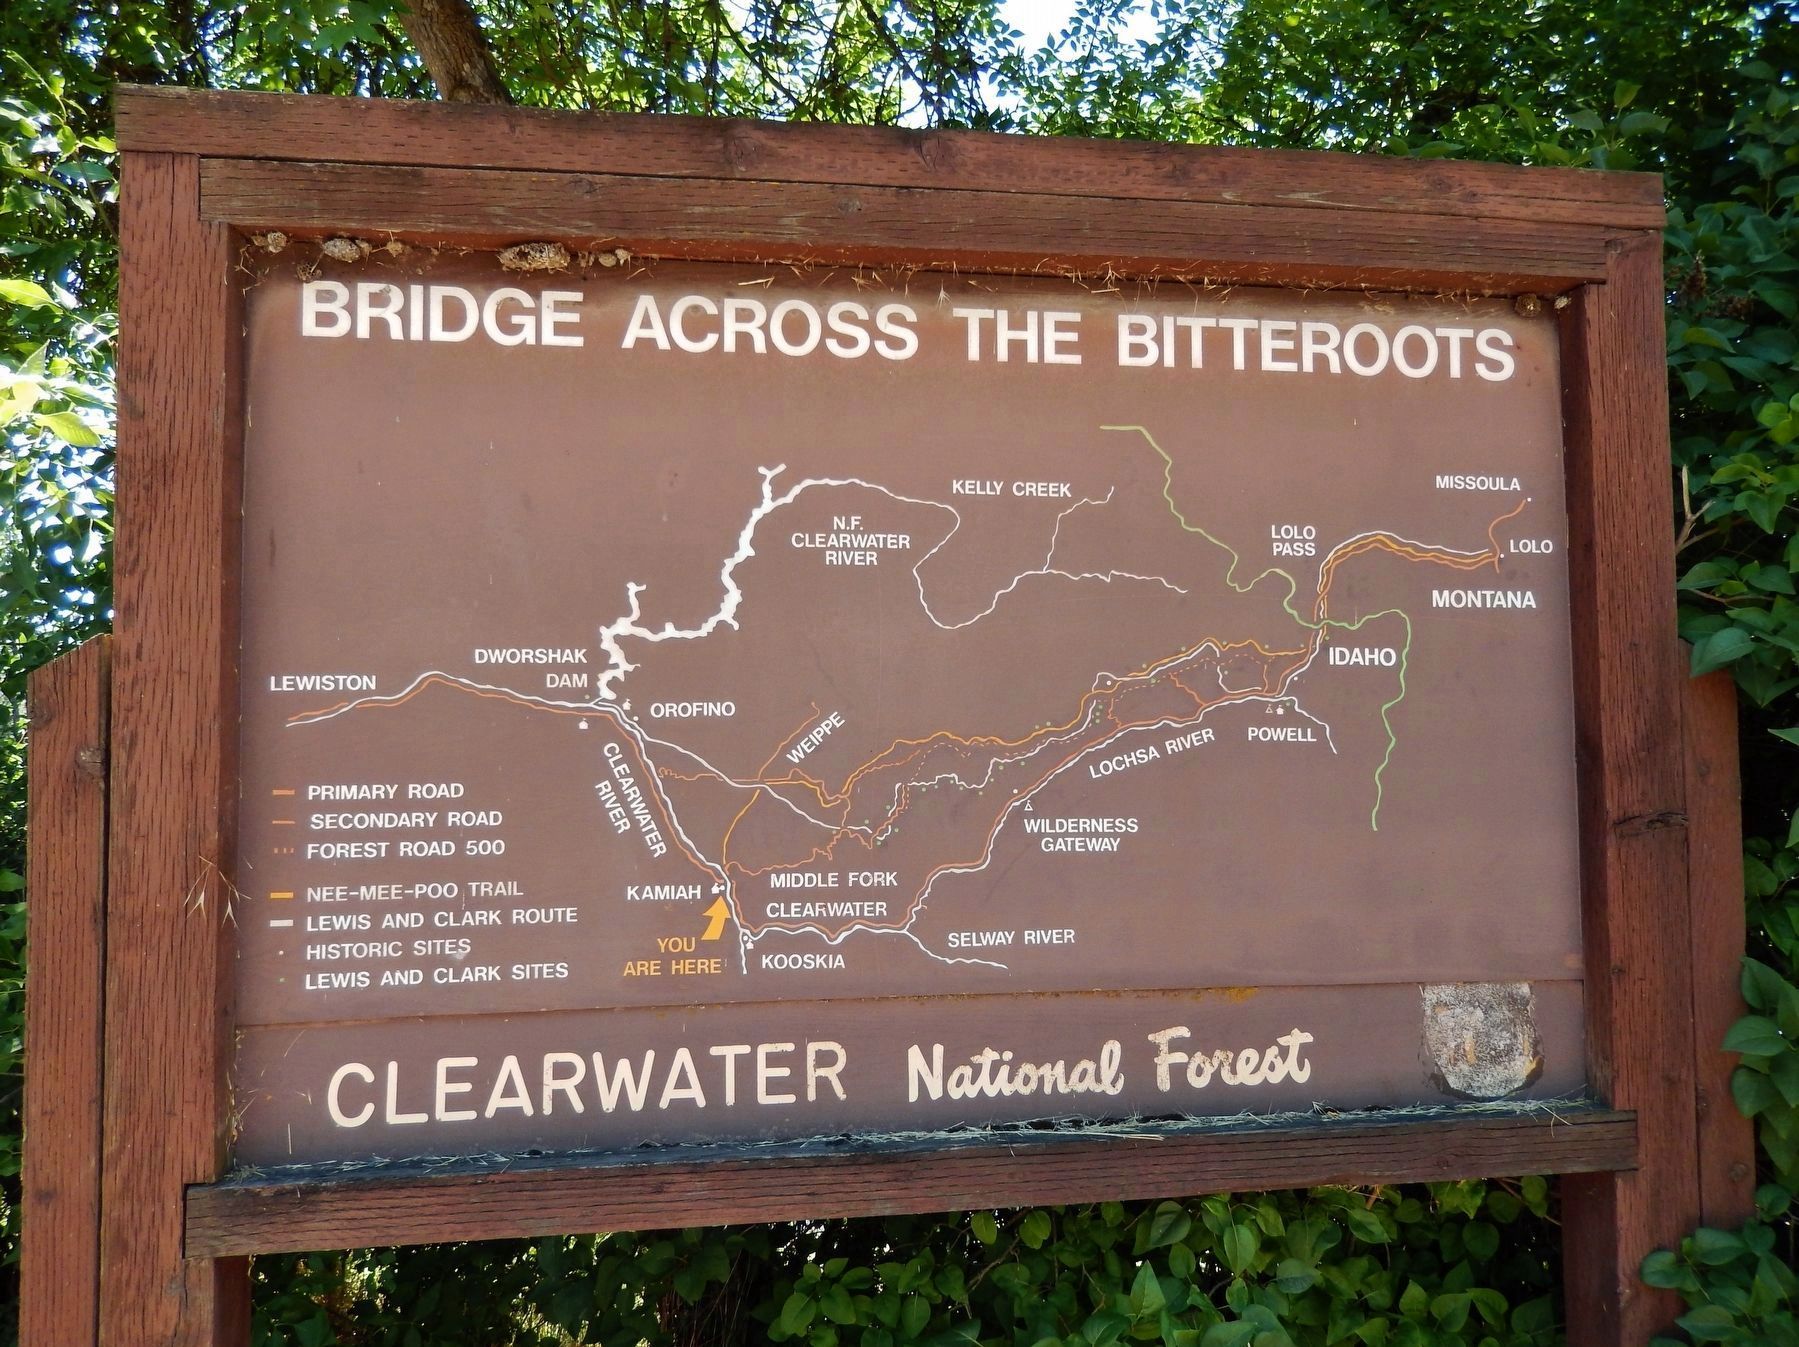 Bridge Across the Bitteroots Map Detail image. Click for full size.